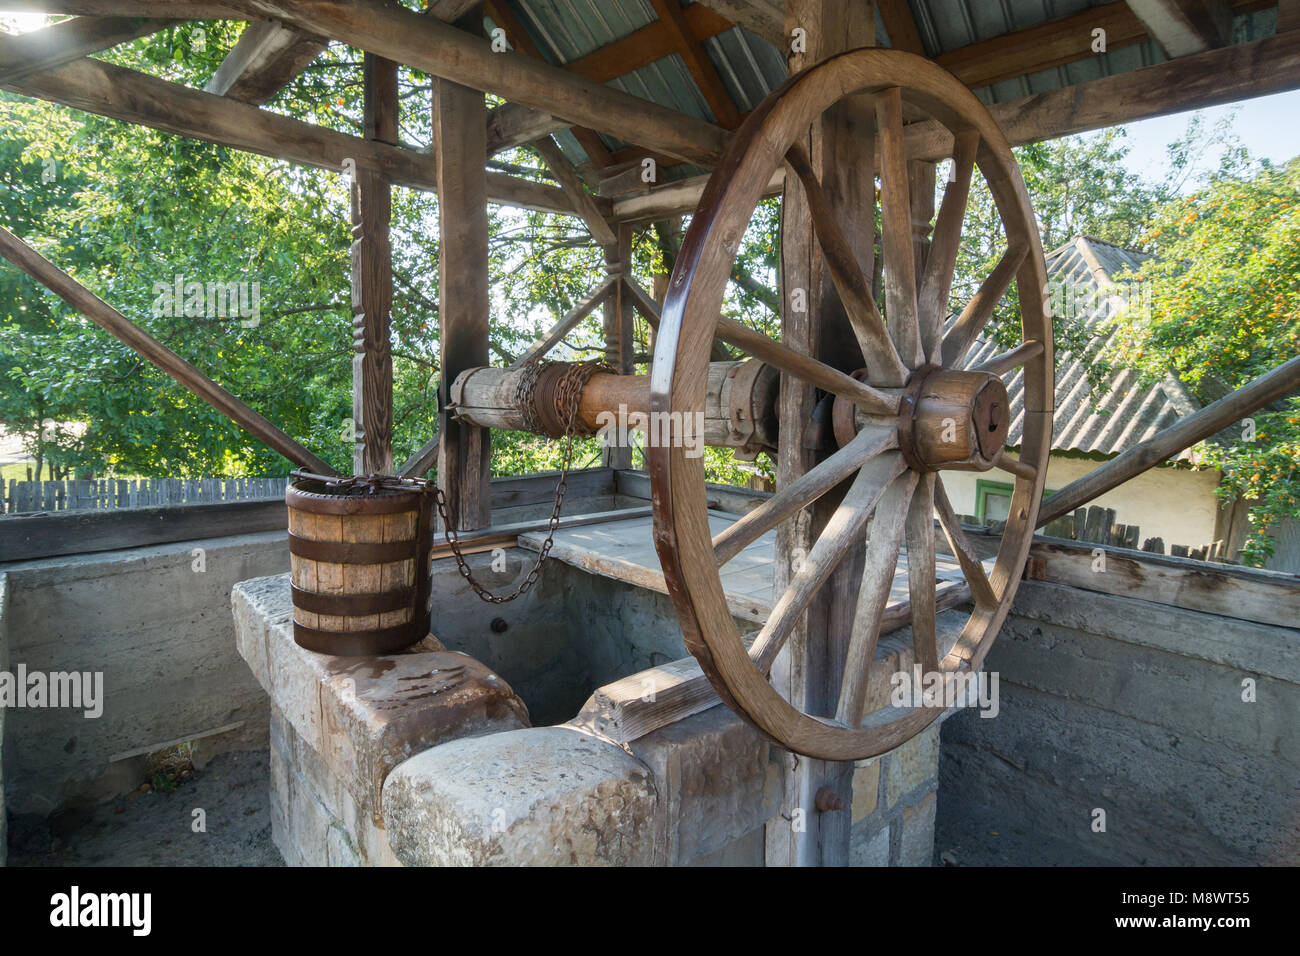 Old,traditional, wooden well with a large wheel, chain and bucket in the country side of Romania Stock Photo